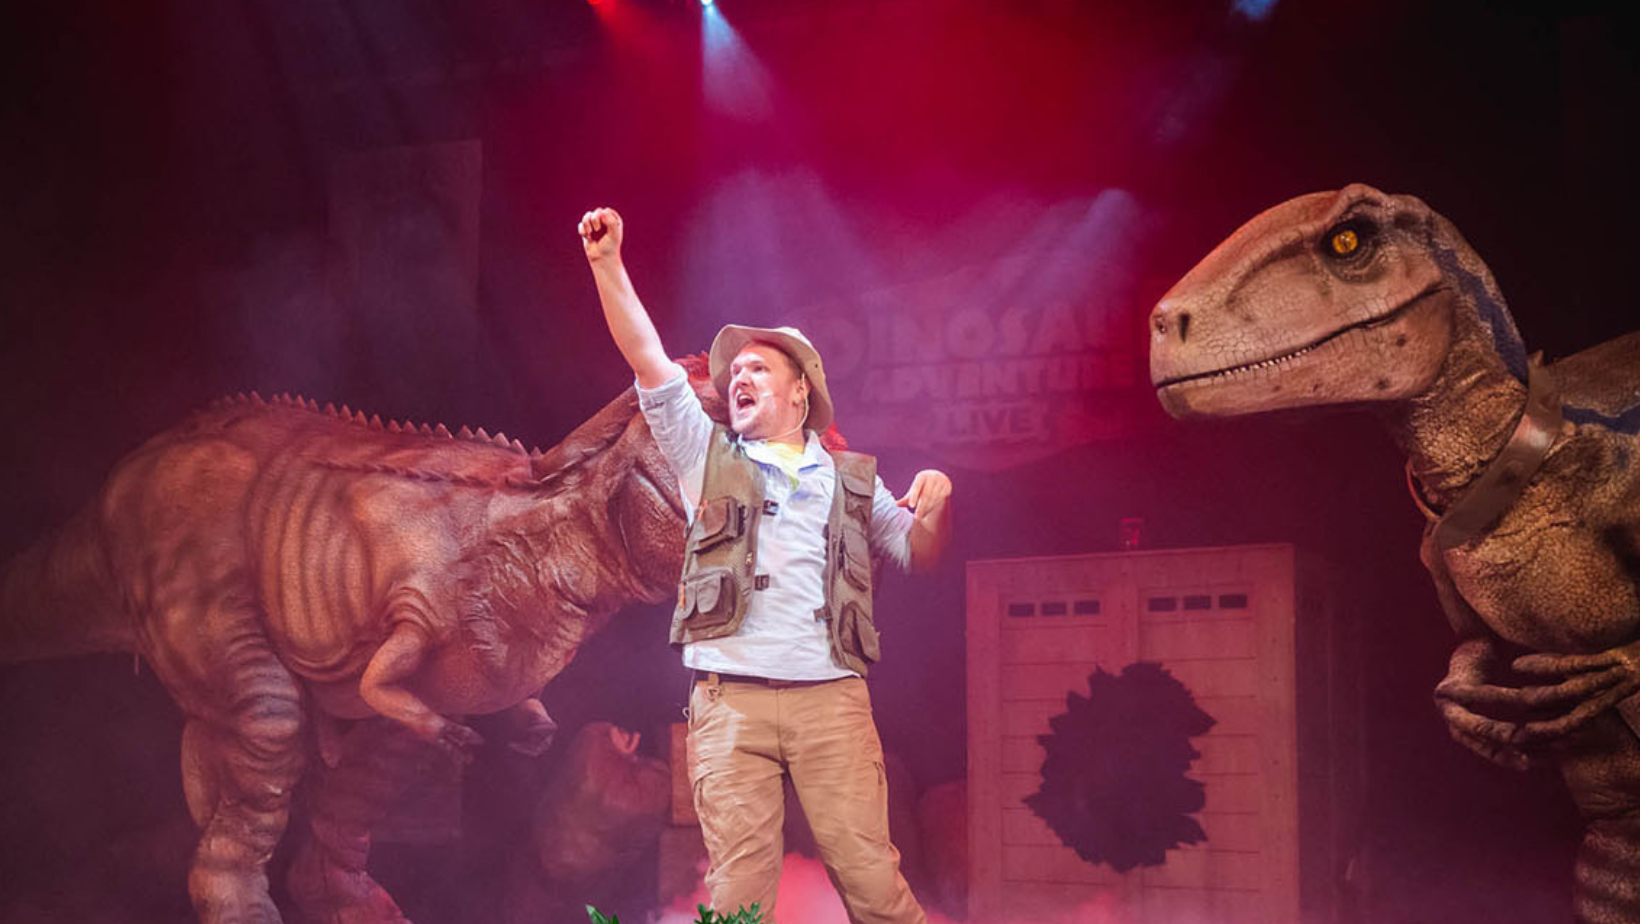 A picture may in explorers clothes with his fist in the air standing by two dinosaurs